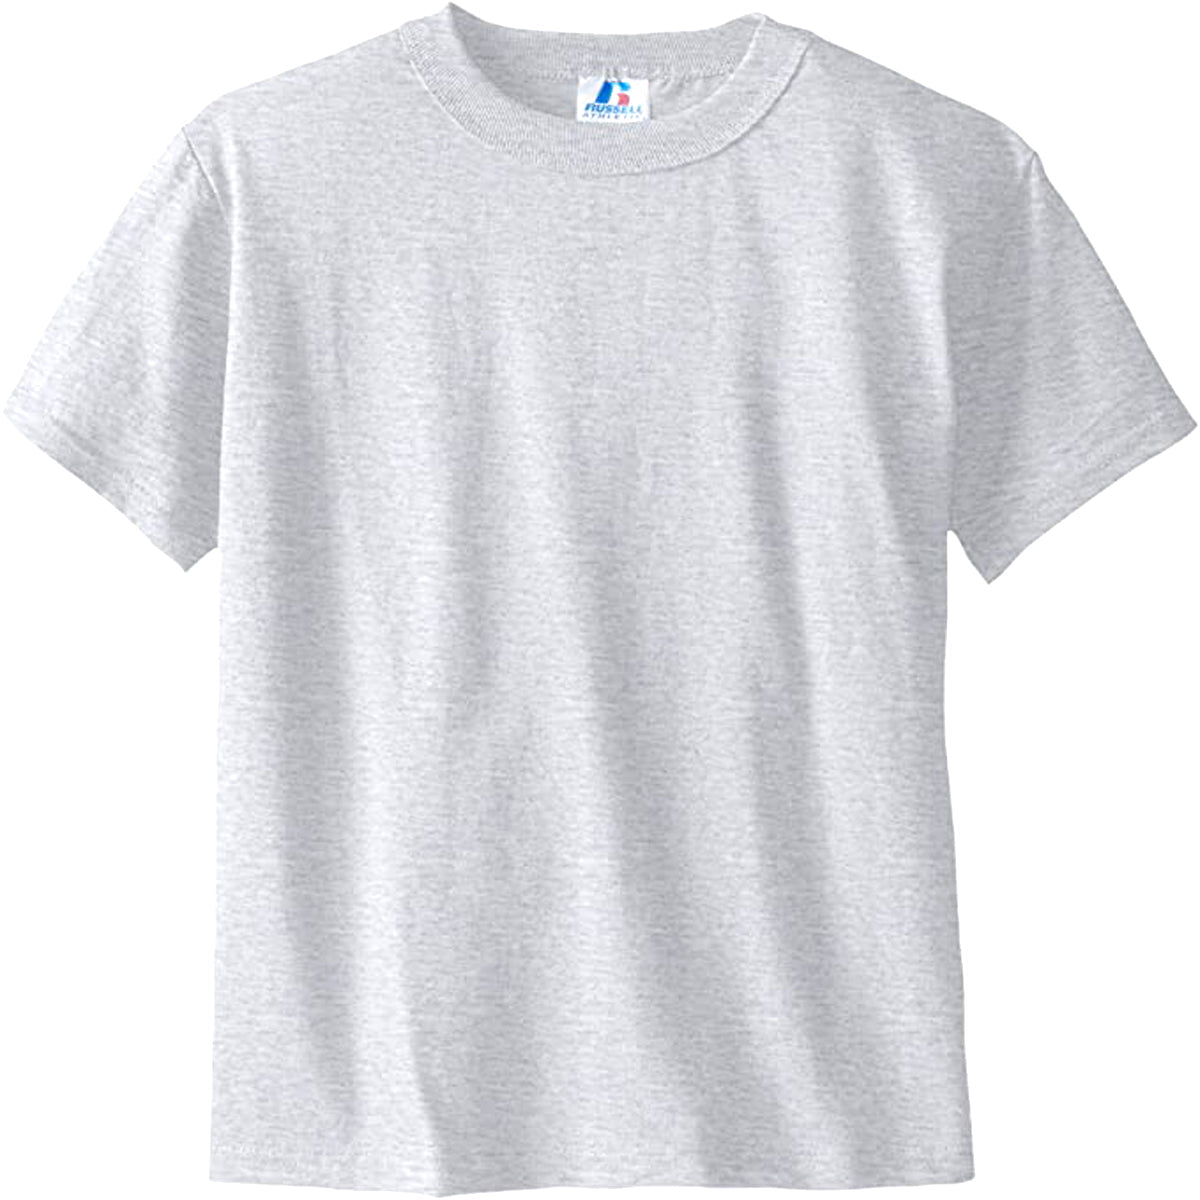 Russell Athletic Youth Short-Sleeve Cotton T-Shirt | 94030BK Apparel Russell Athletic Youth Small Birch 